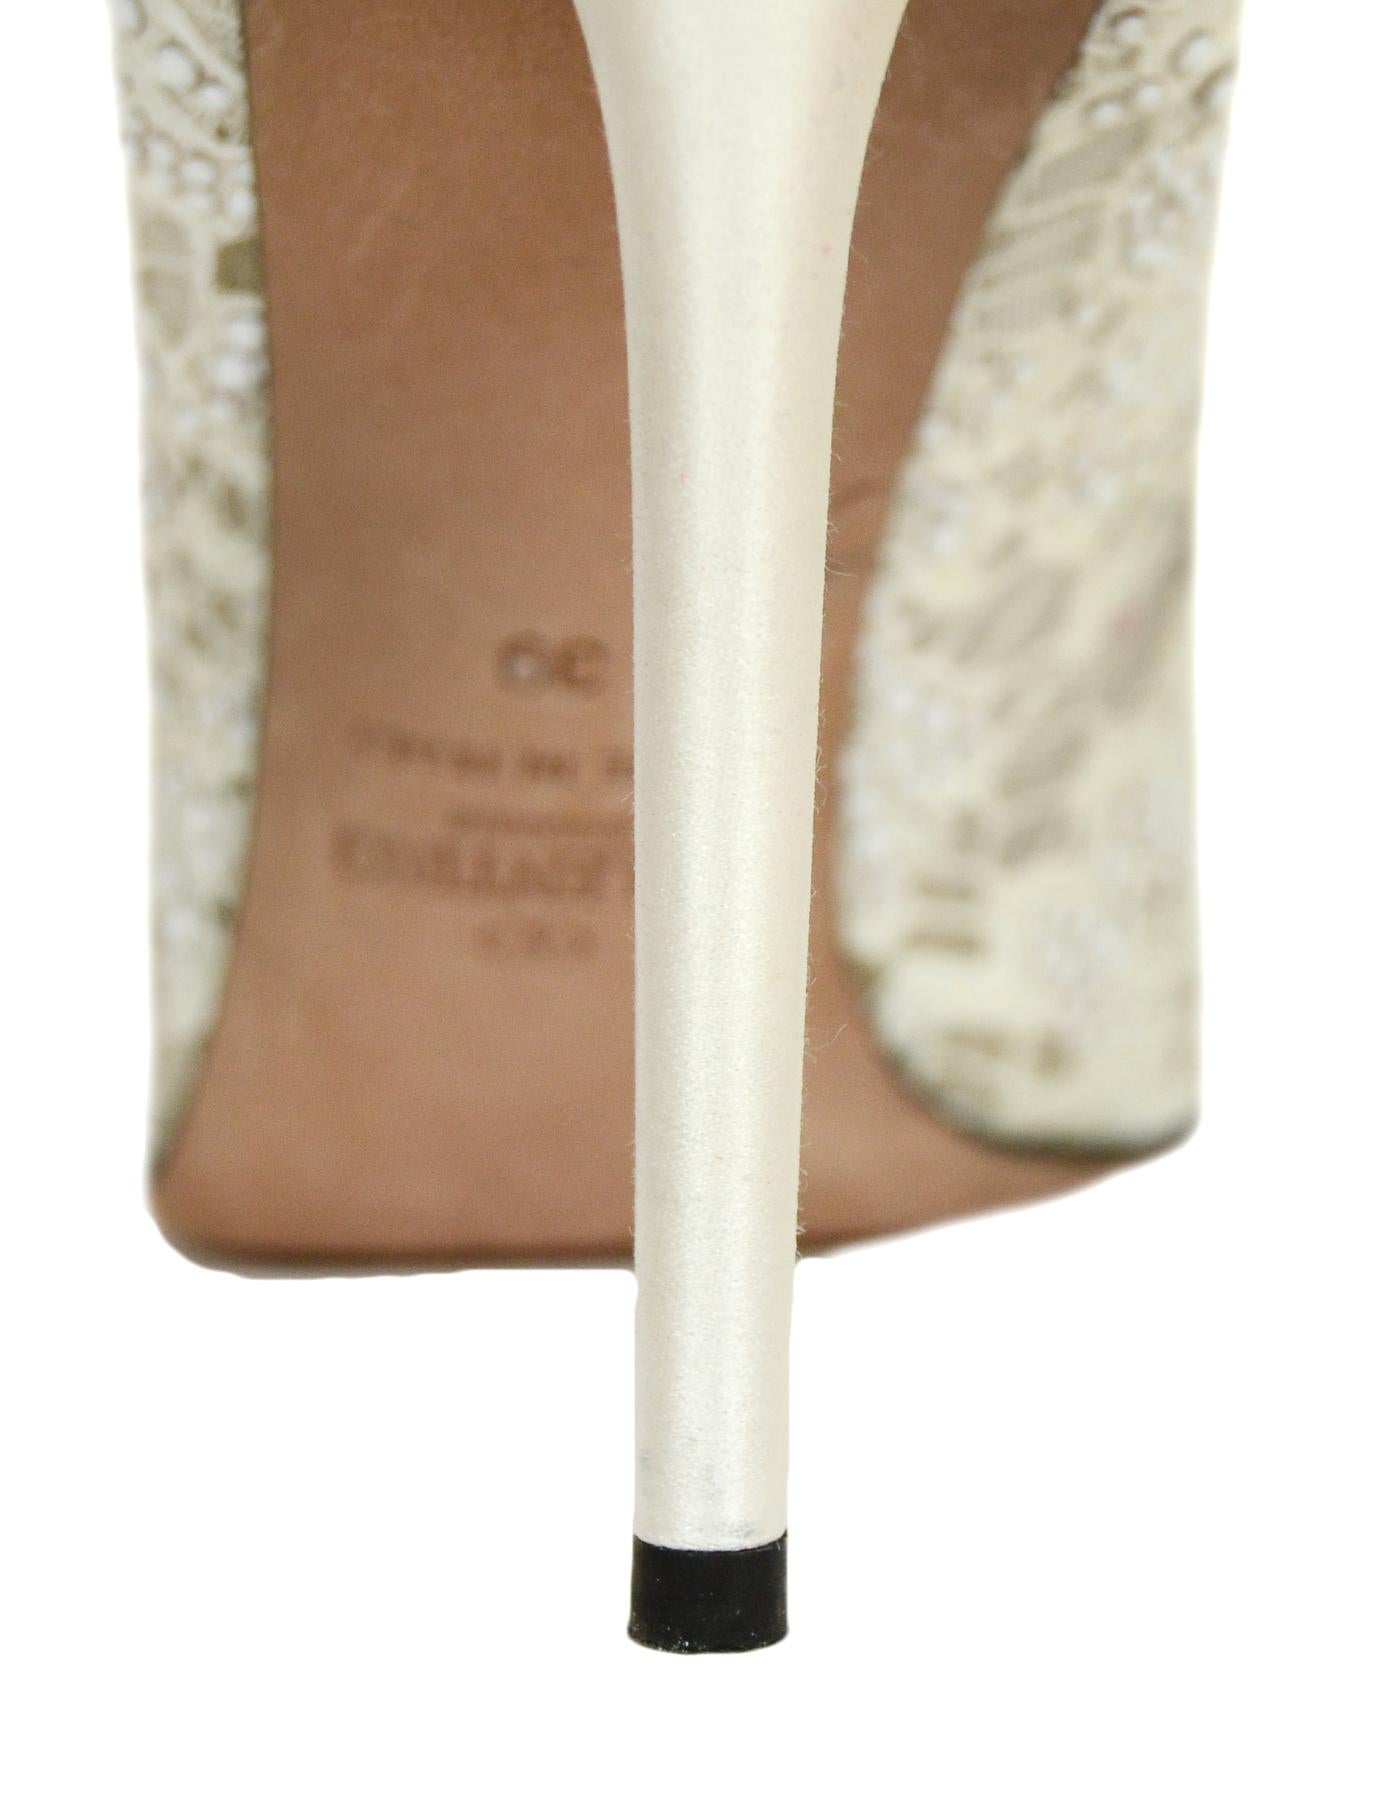 Women's Valentino off-White Lace/Crystal Point Toe Pumps sz 39 rt. $1, 695